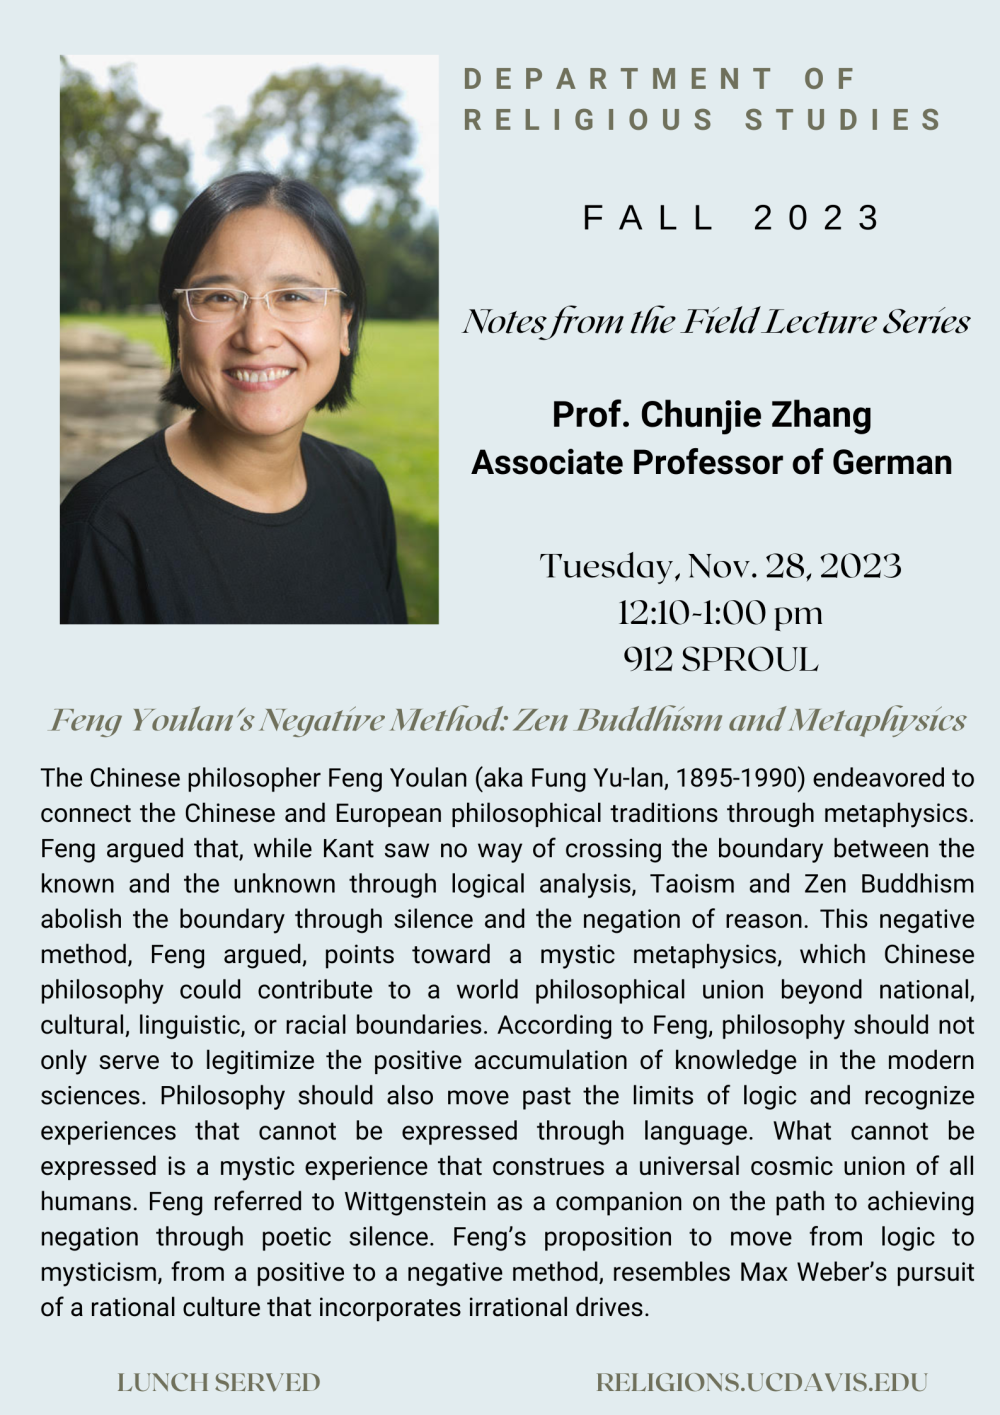 A flyer for the upcoming event, with a photo of Dr. Zhang